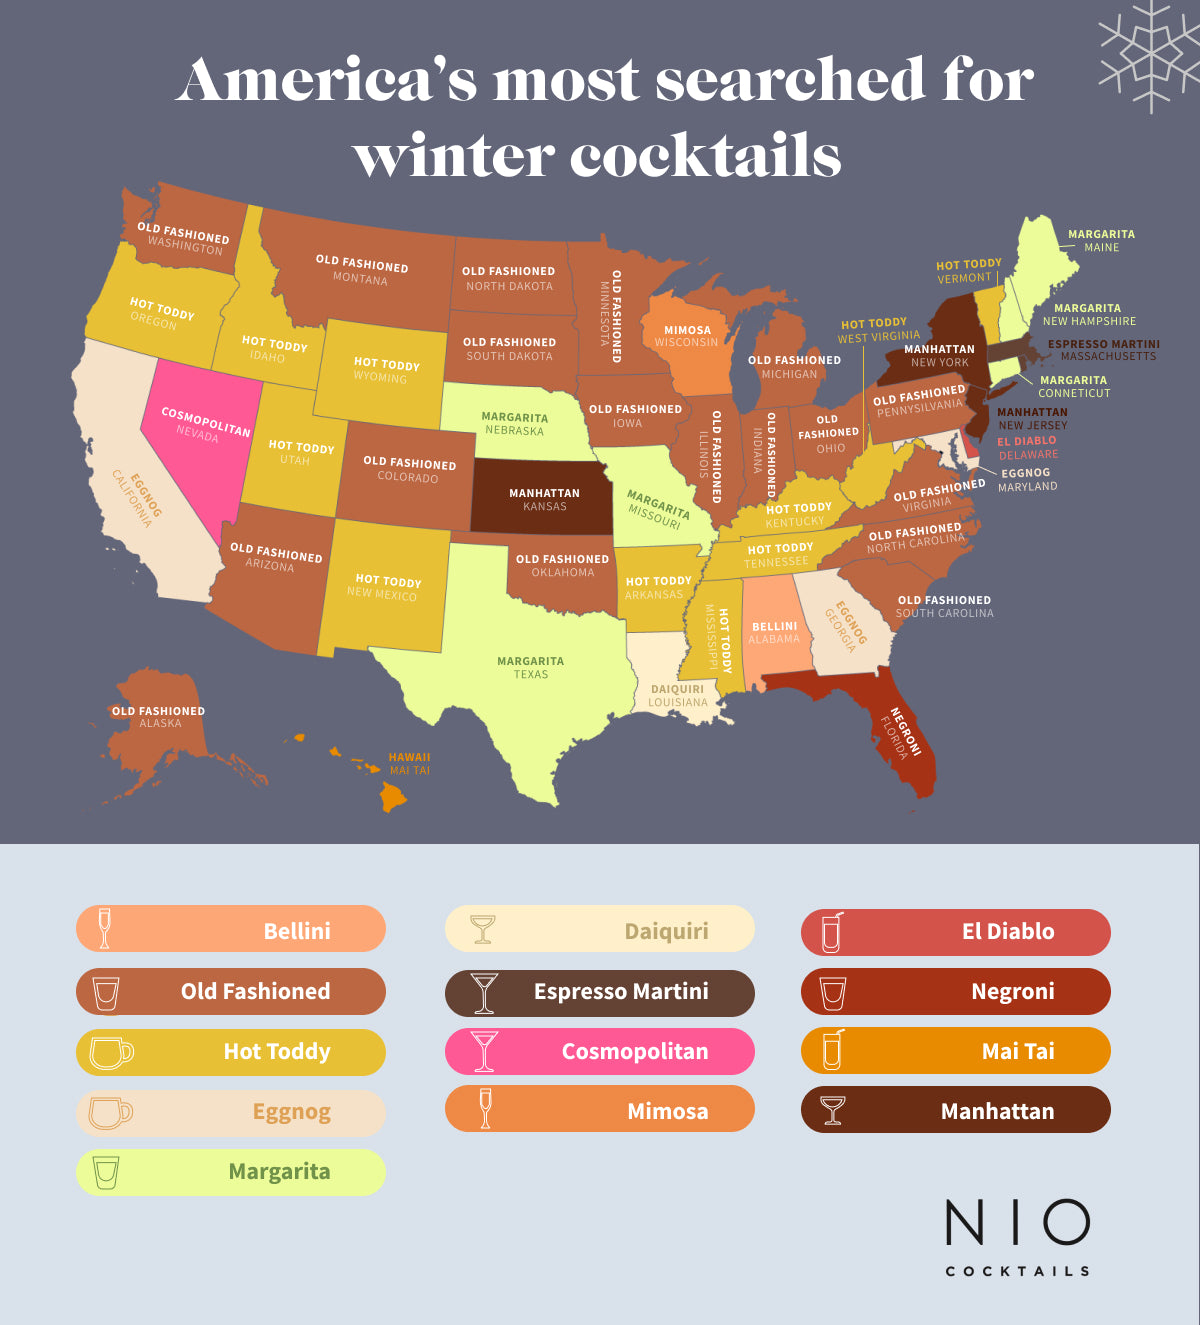 Top cocktails by State